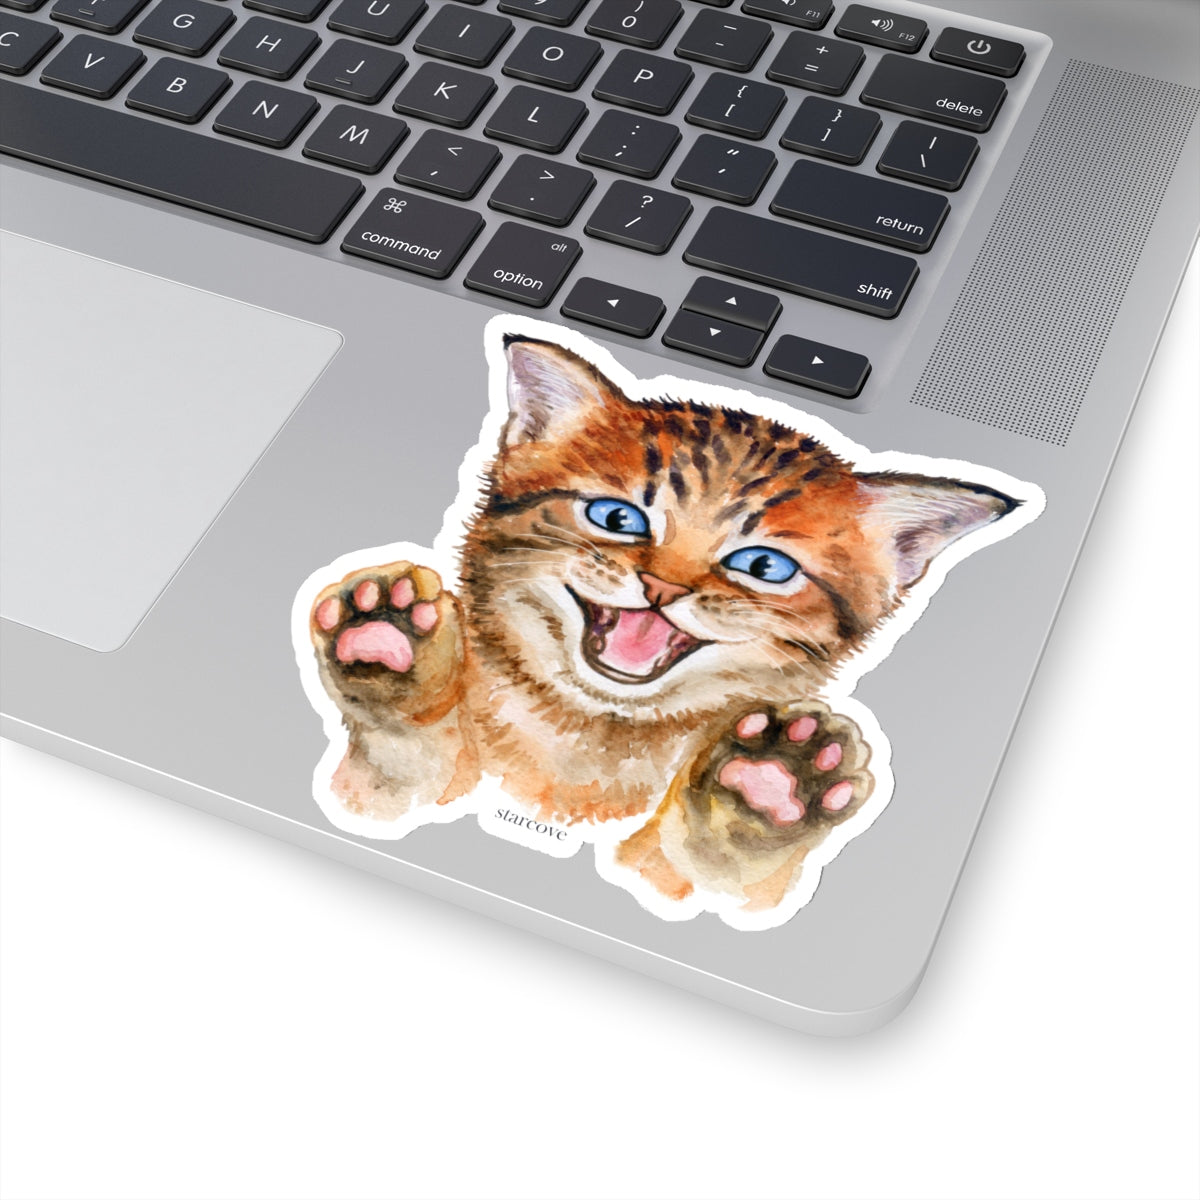 Happy Cute Cat Sticker, Paws Kitten Kitty Watercolor Laptop Decal Vinyl Cute Funny Waterbottle Tumbler Car Bumper Aesthetic Label Wall Mural Starcove Fashion